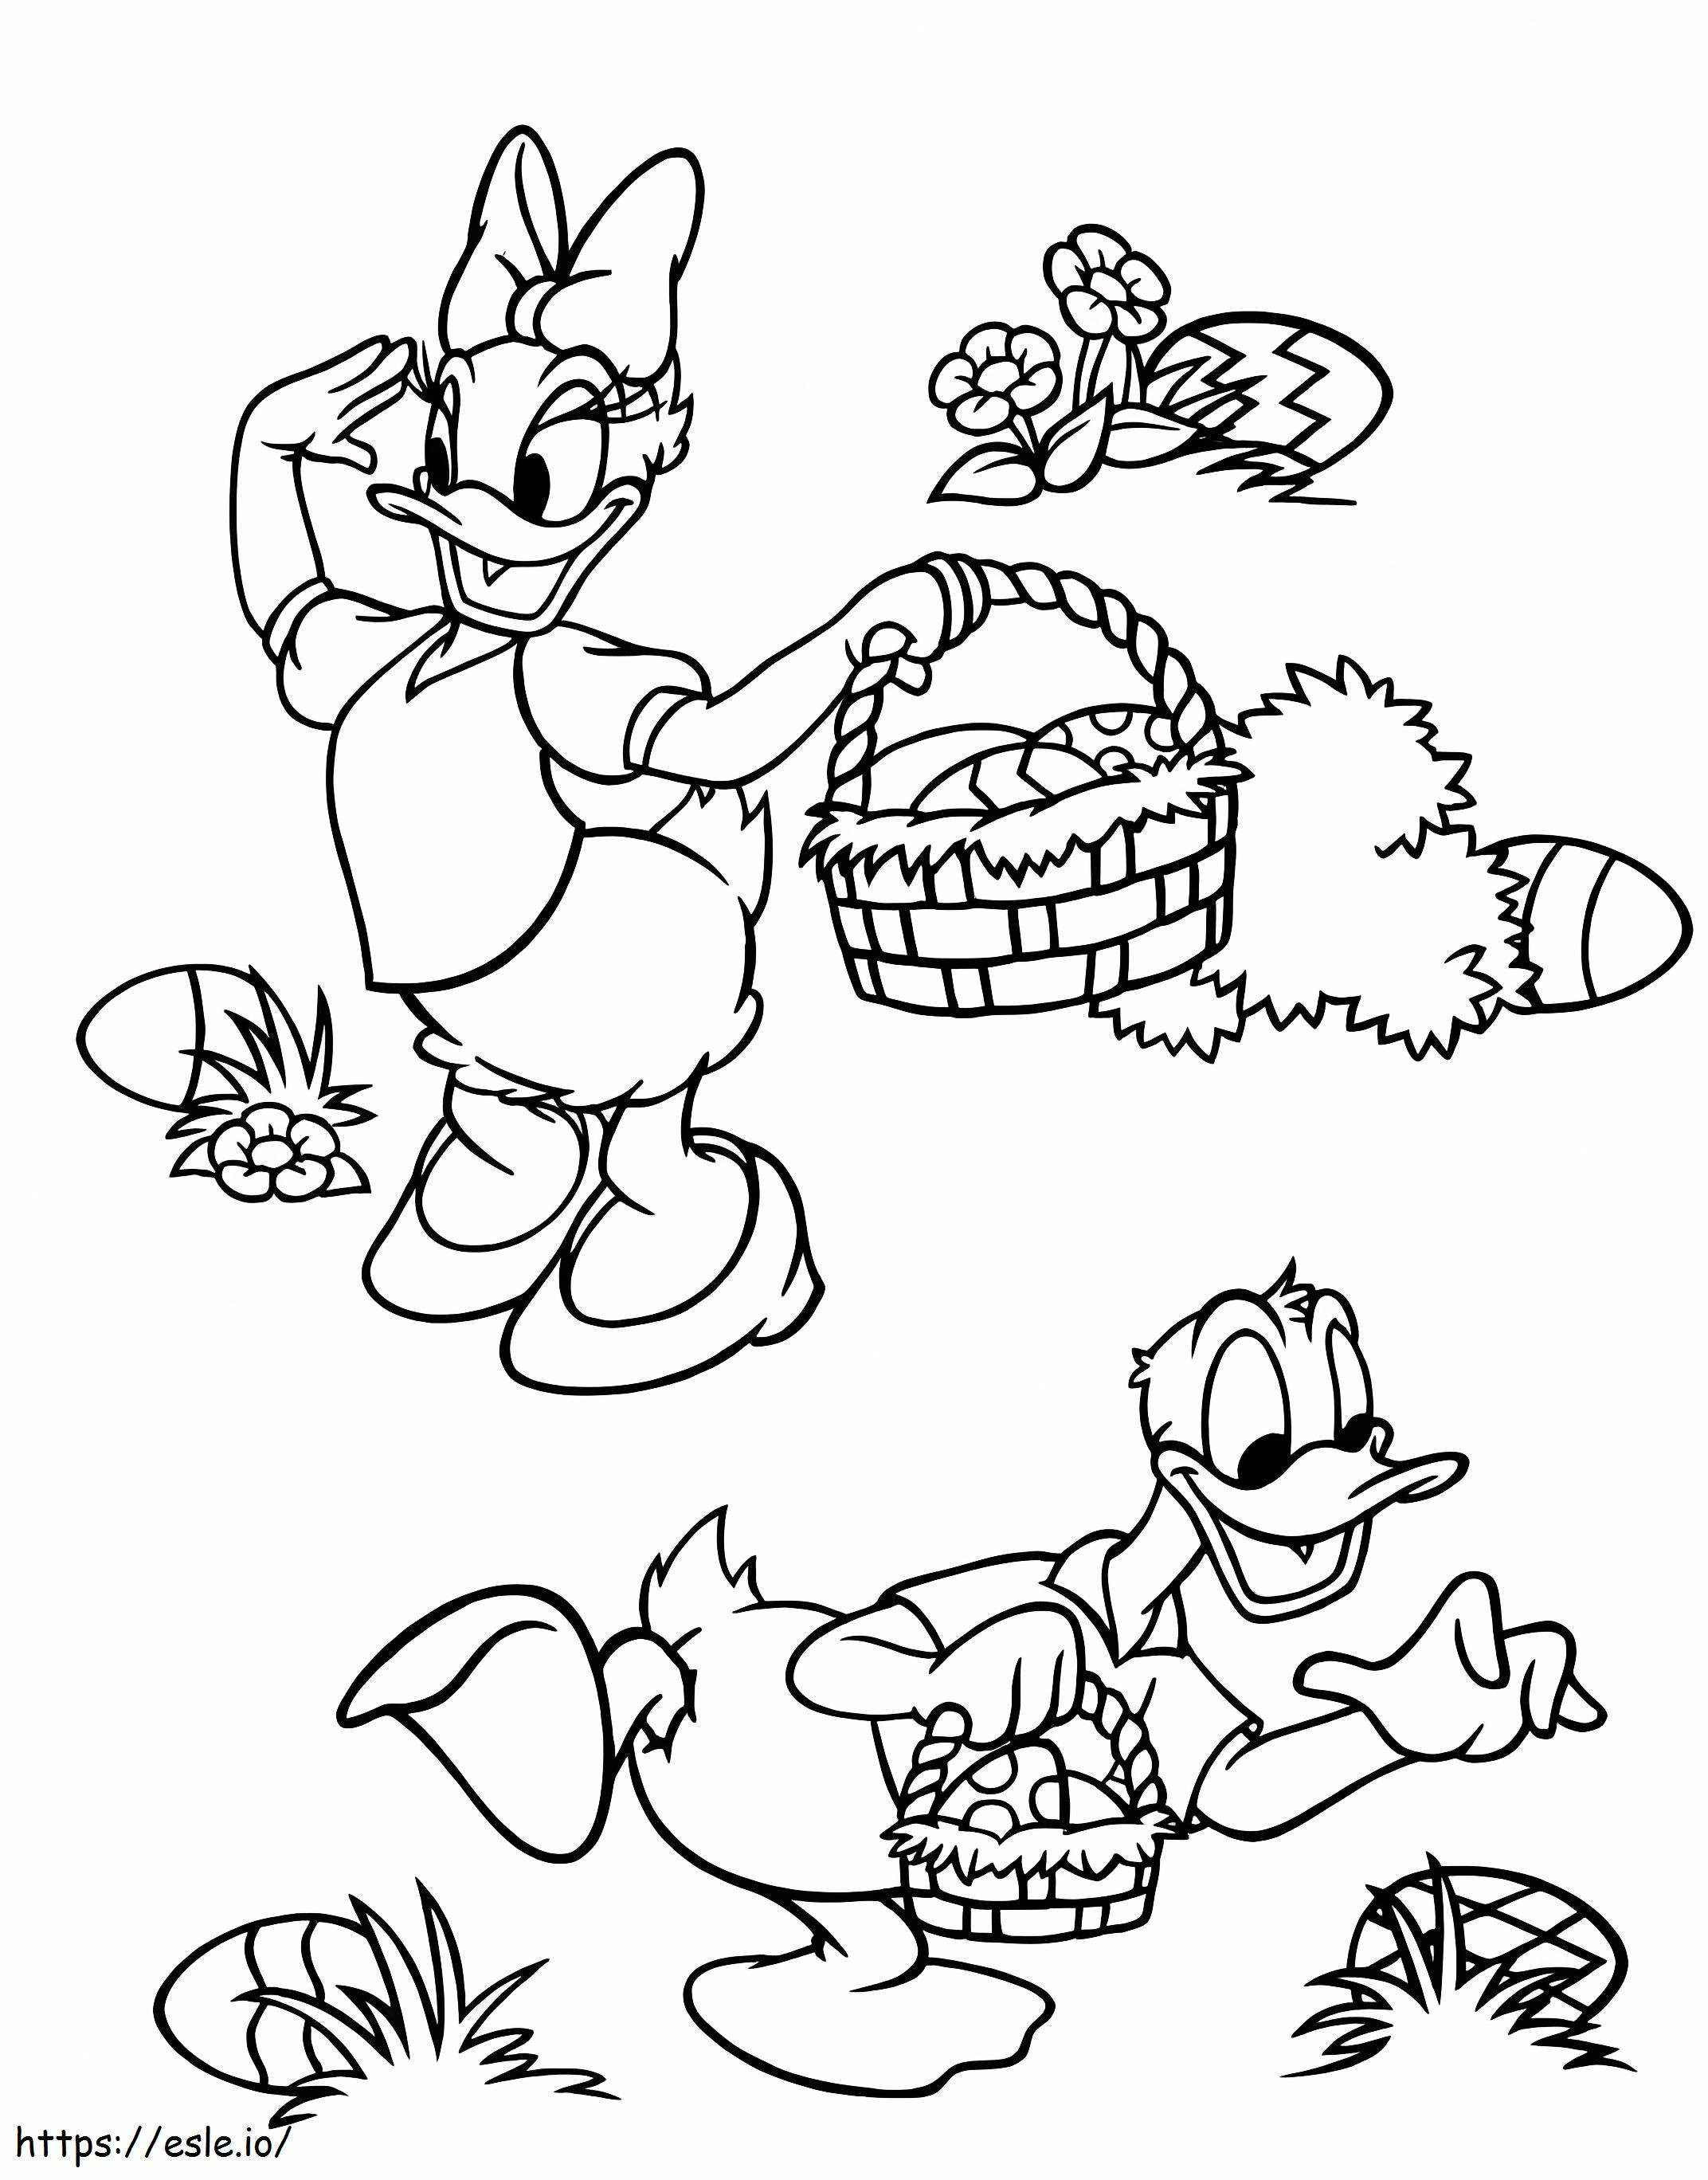 Donald Duck Easter Basket coloring page